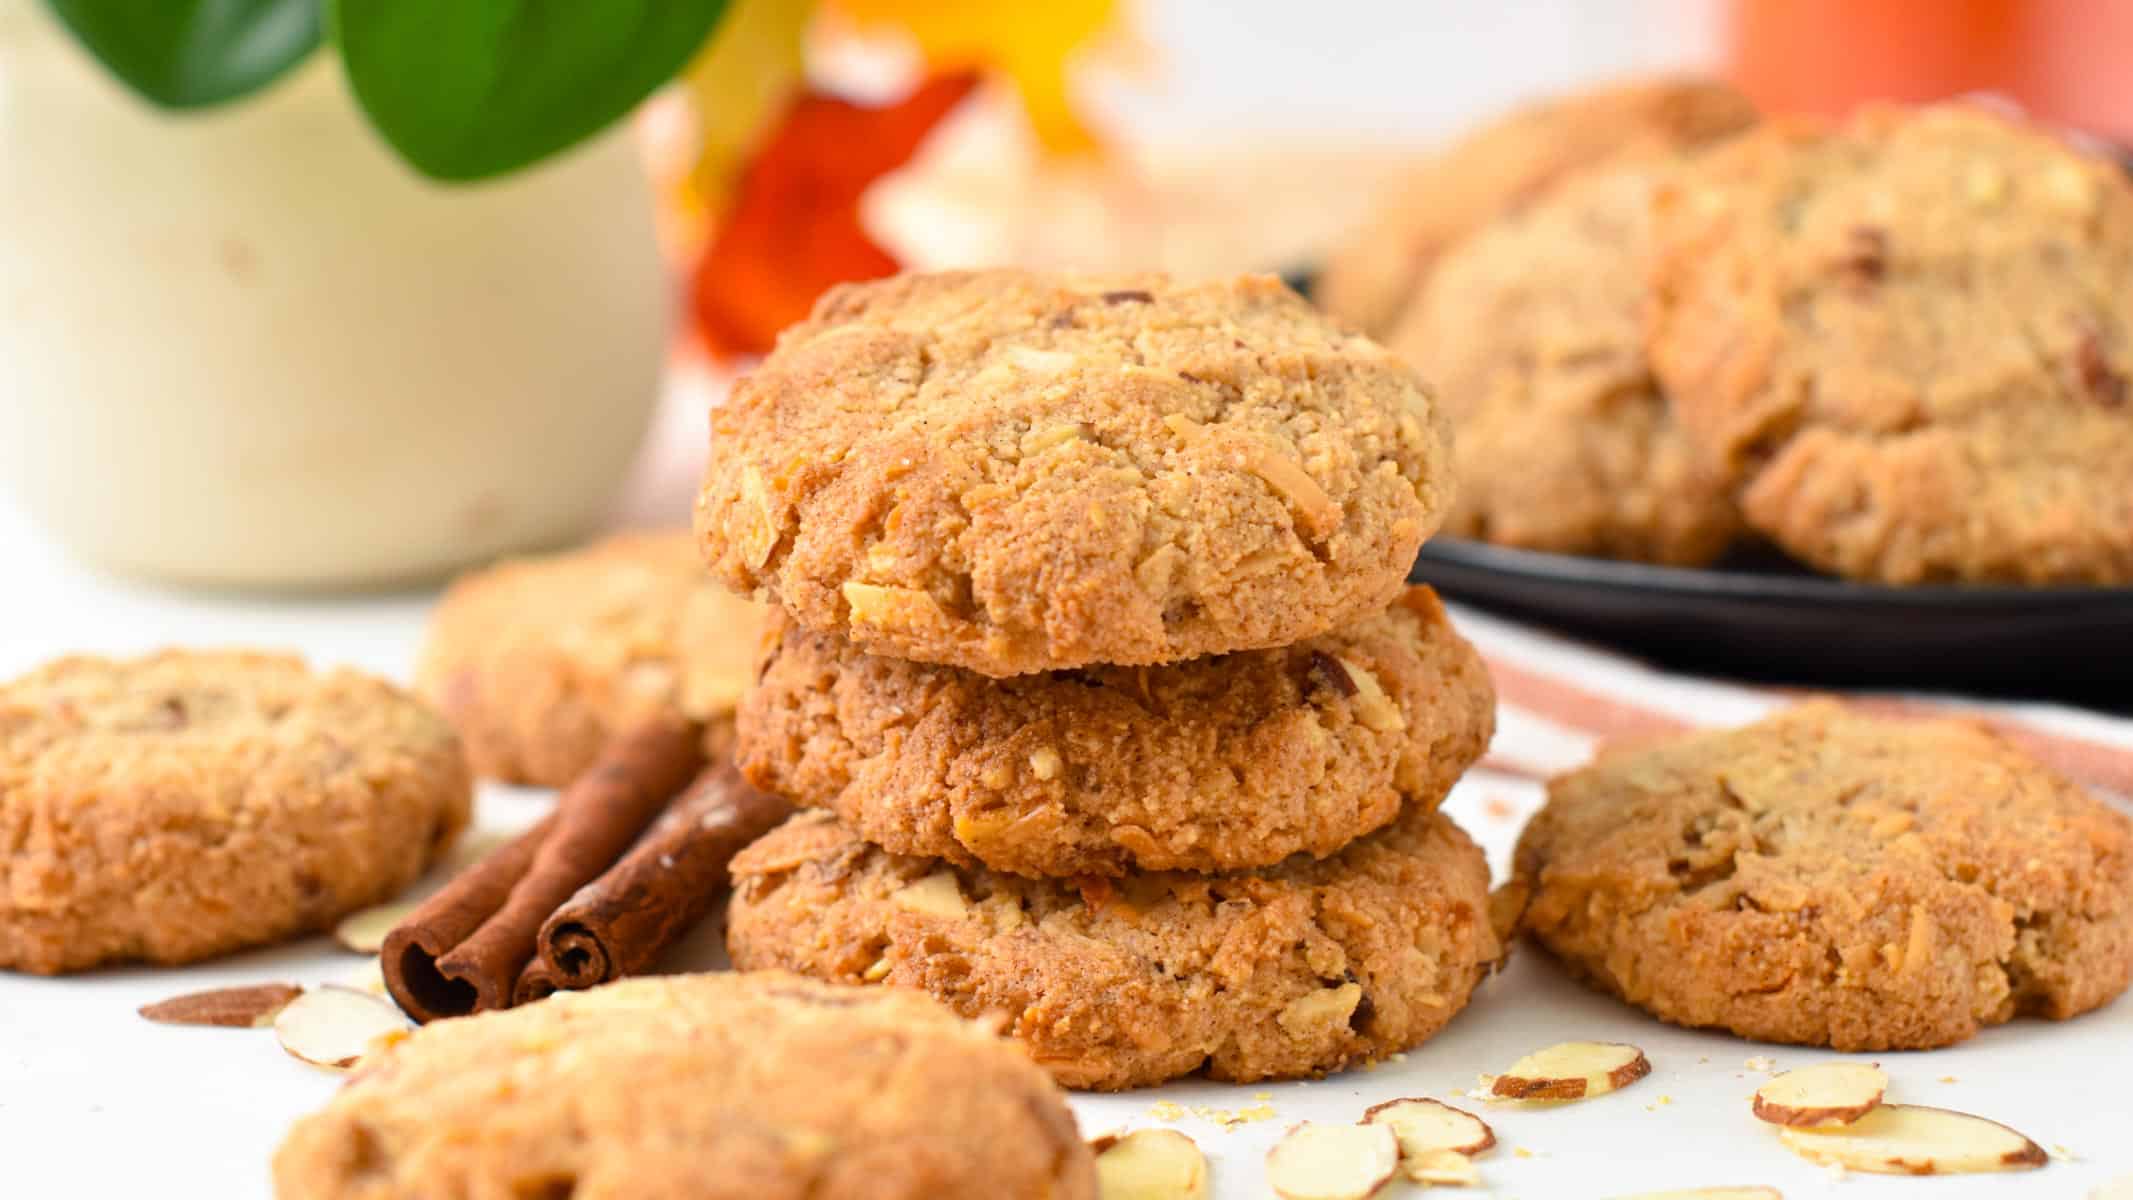 a stack of keto oatmeal cookies made with cinnamon stick on sides and slices almonds